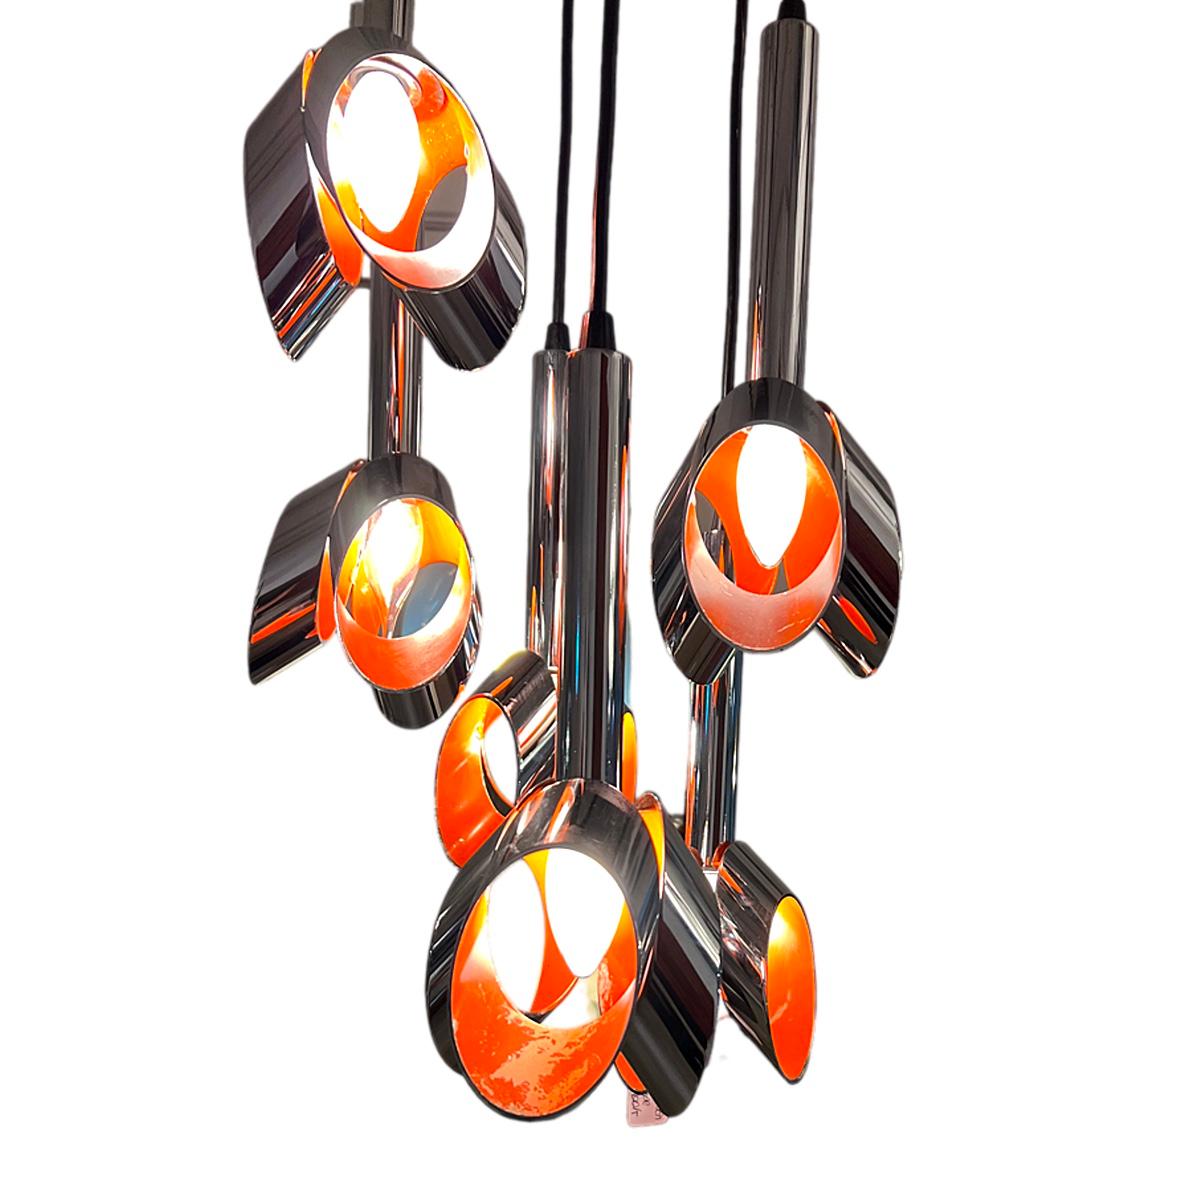 Mid-20th Century Chrome and Orange Cascading Chandelier from Massive Belgium 1969 For Sale